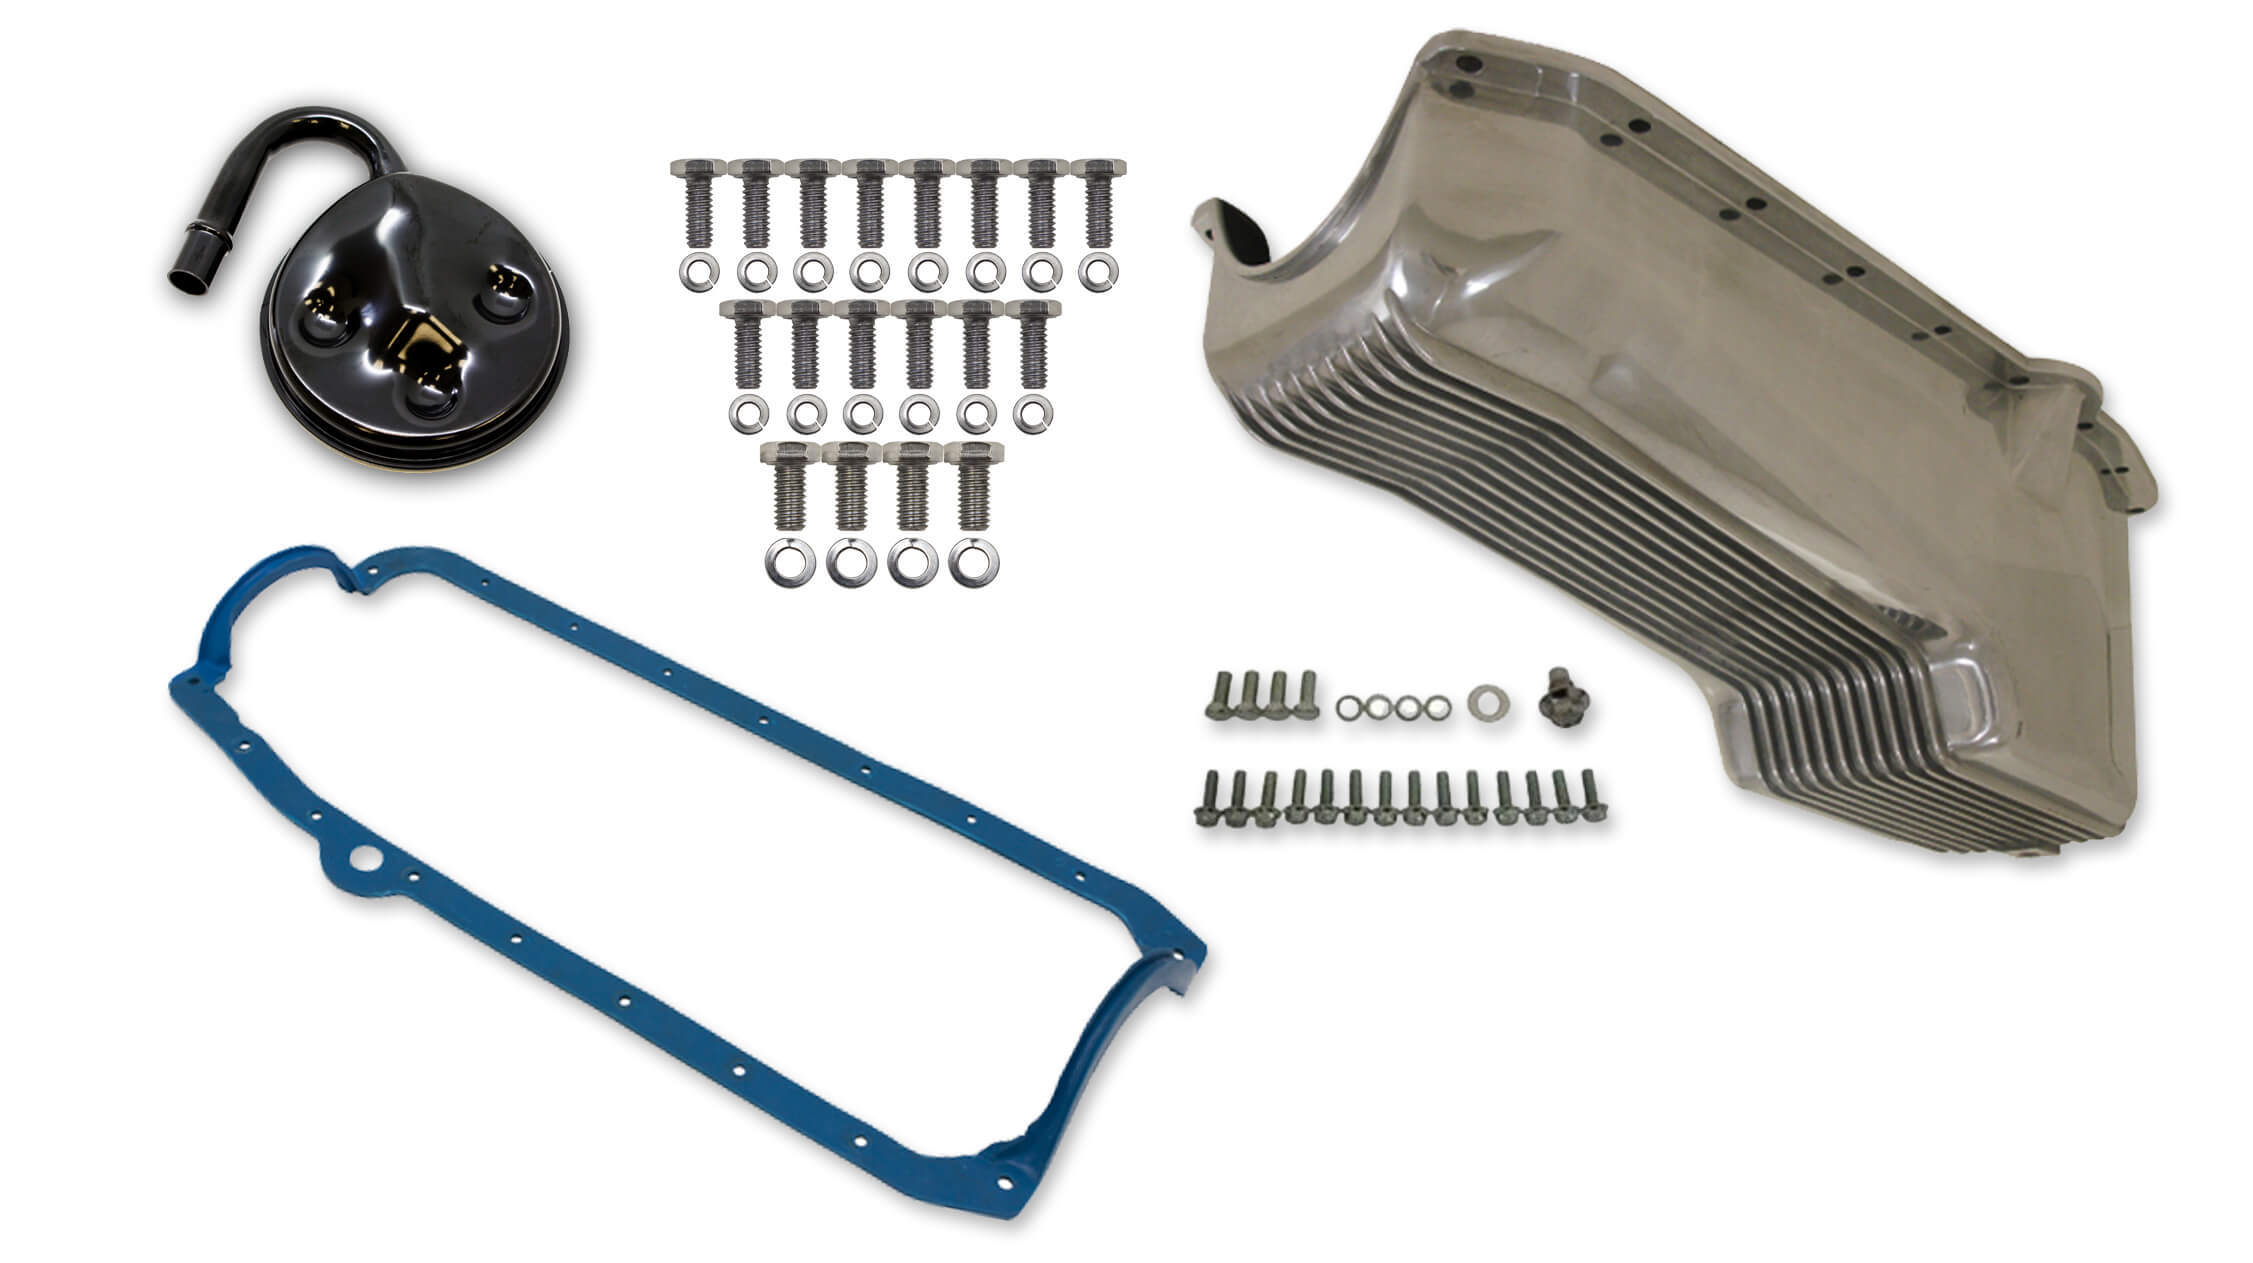 Weiand 6500FWND Engine Oil Pan Kit, Rear Sump, 4 qt, 7-5/16 in Deep, Hardware / Gasket / Pickup, Aluminum, Polished, Small Block Chevy, Kit